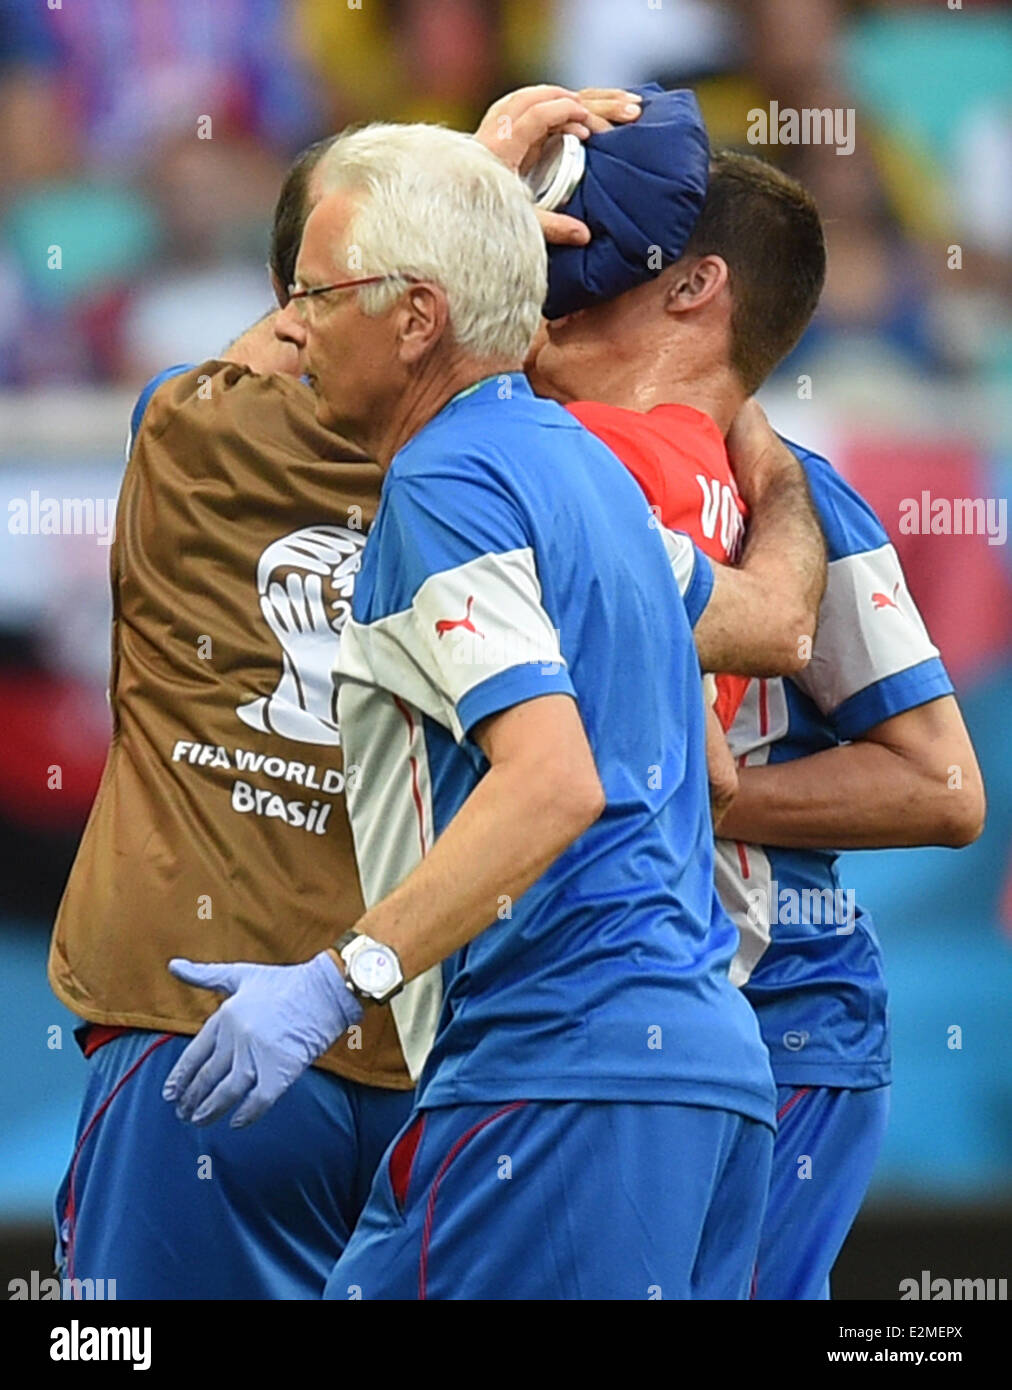 Salvador, Brazil. 20th June, 2014. Switzerland's Steve von Bergen (R) is led off the pitch due to an injury during the FIFA World Cup 2014 group E preliminary round match between Switzerland and France at the Arena Fonte Nova in Salvador, Brazil, 20 June 2014. Photo: Marius Becker/dpa/Alamy Live News Stock Photo